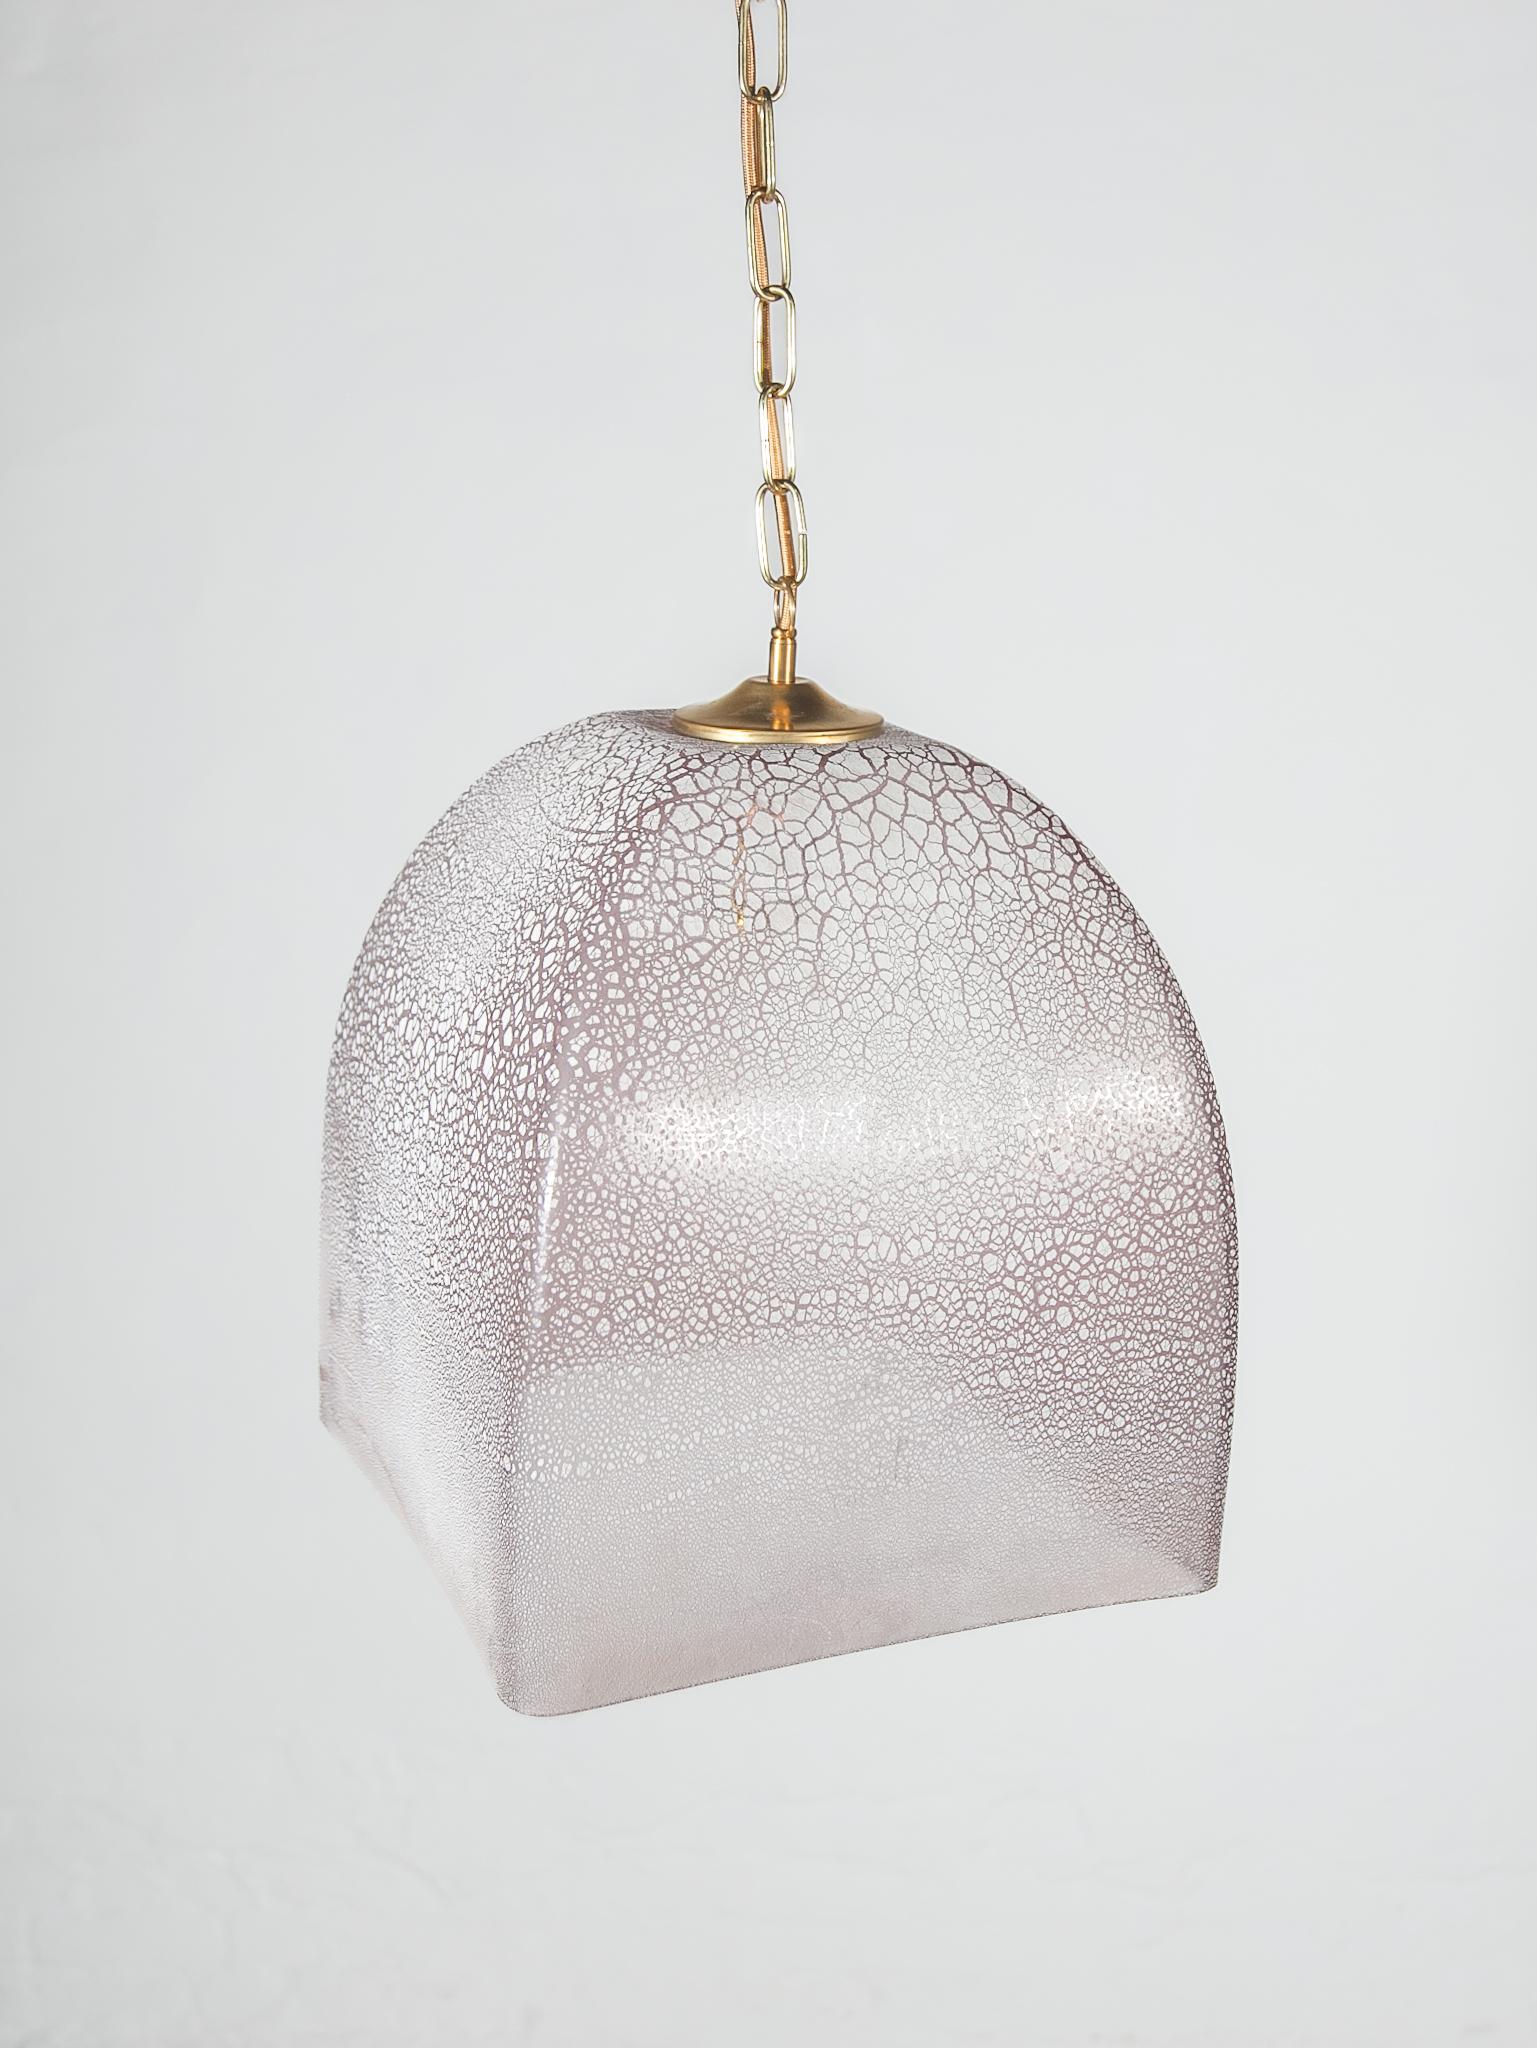 Blown Glass Pink Glass Textured Pendant designed by Alfredo Barbini, Italy